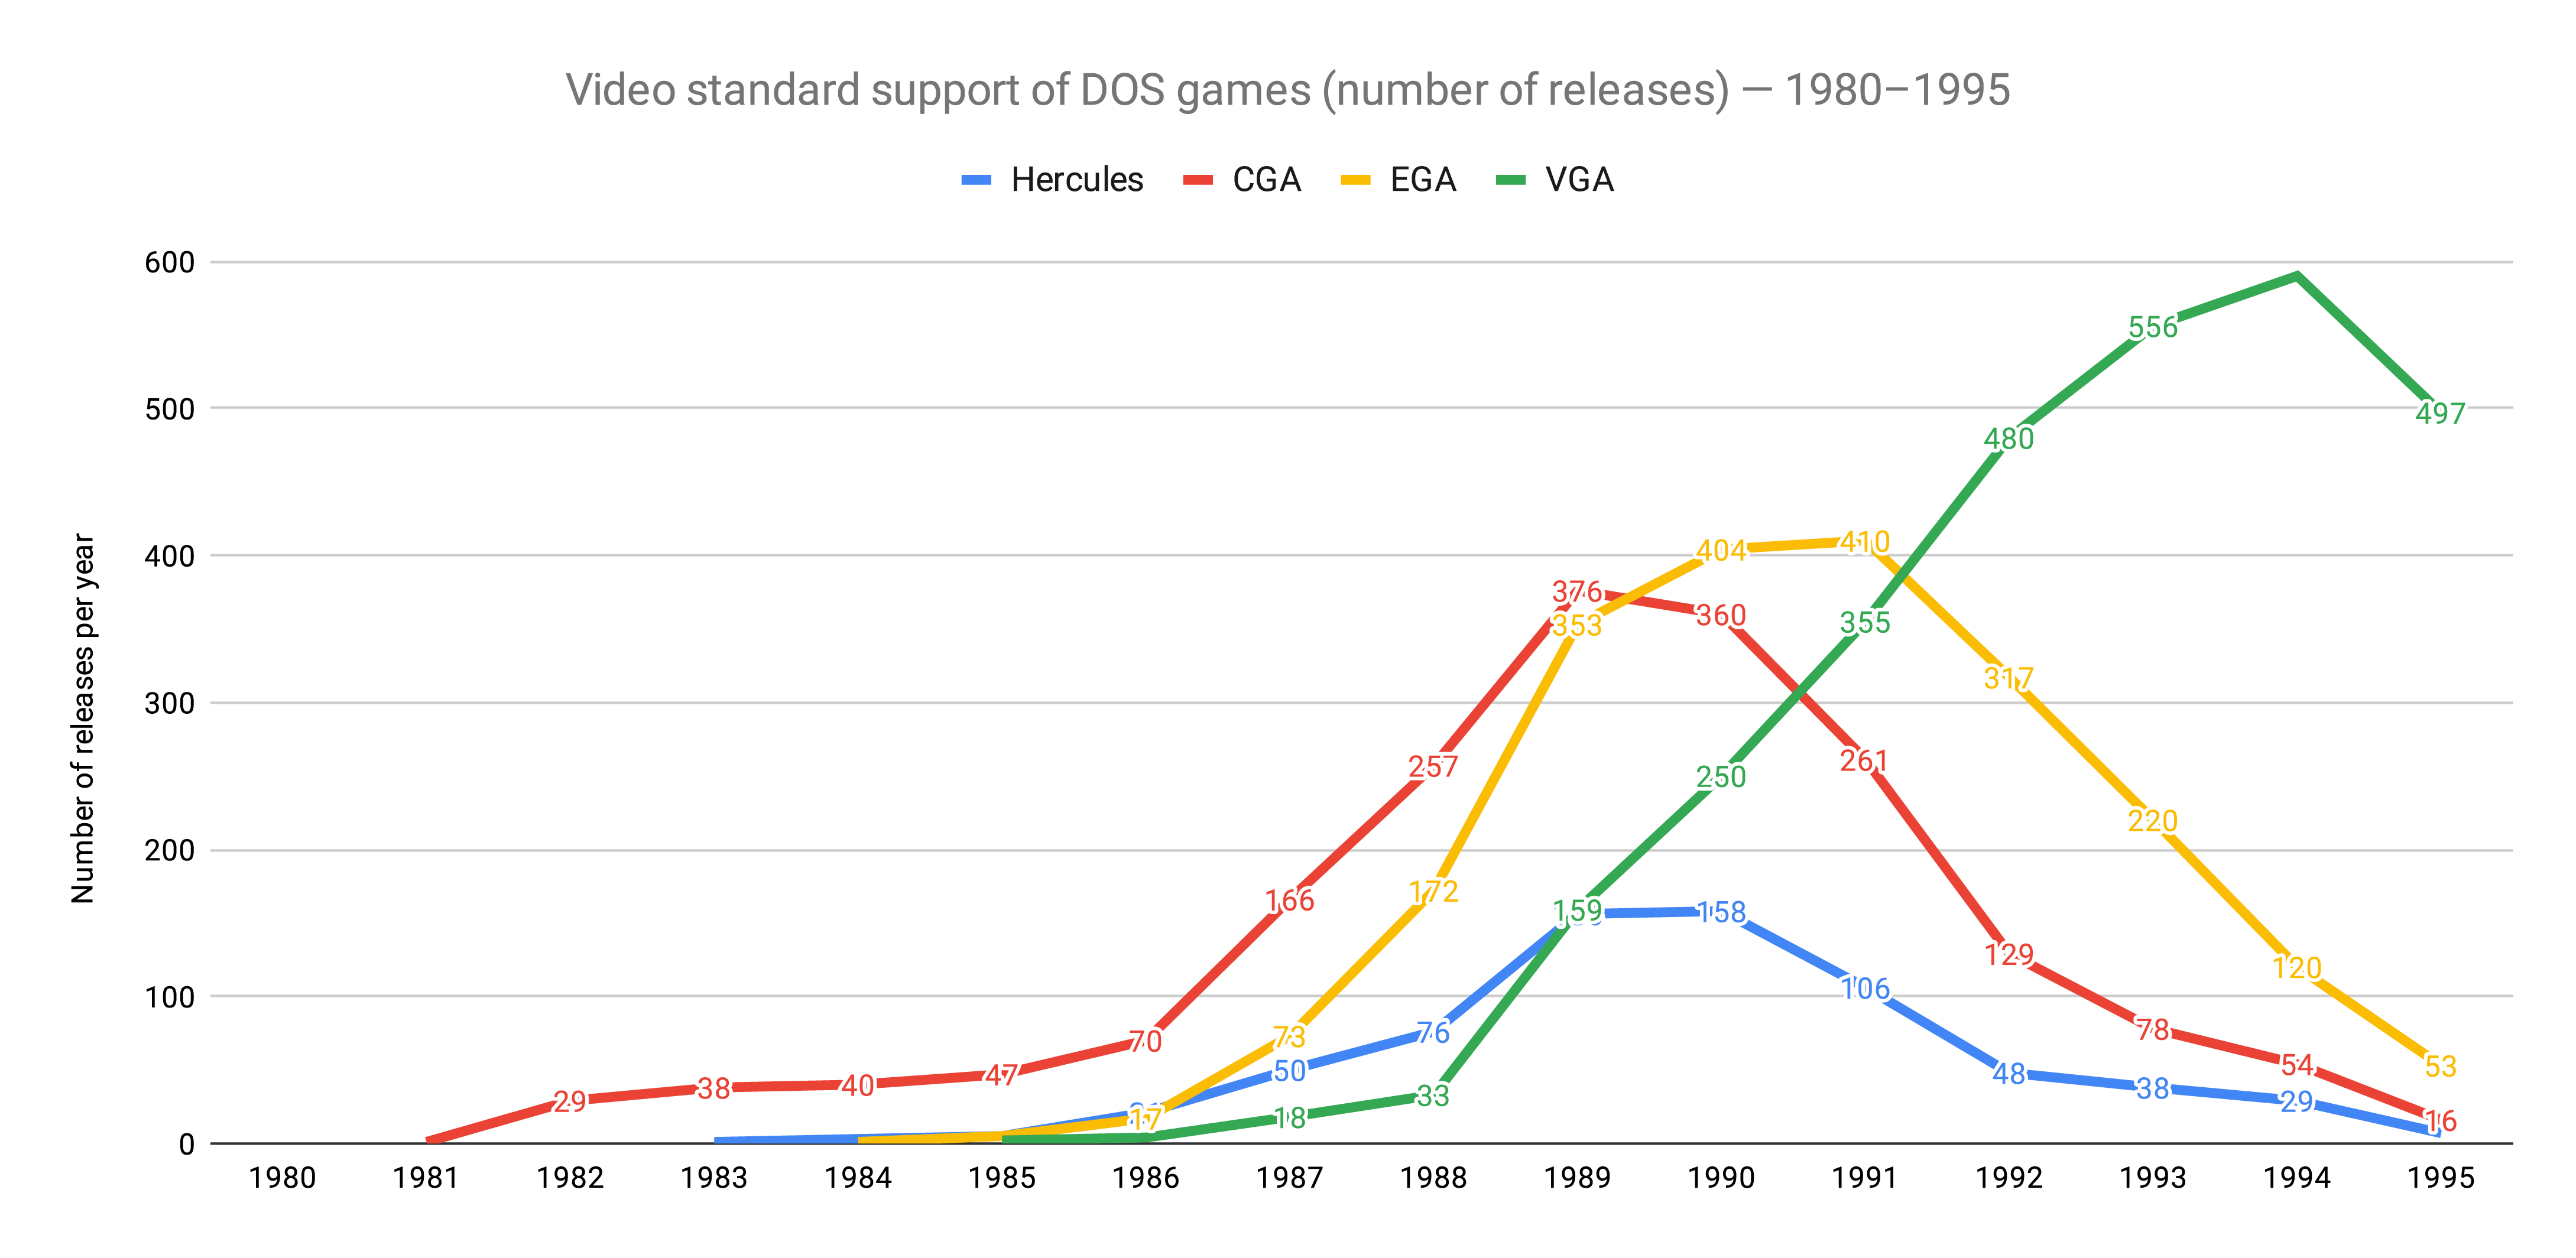 Video standard support of DOS games (number of releases) between 1980-1995